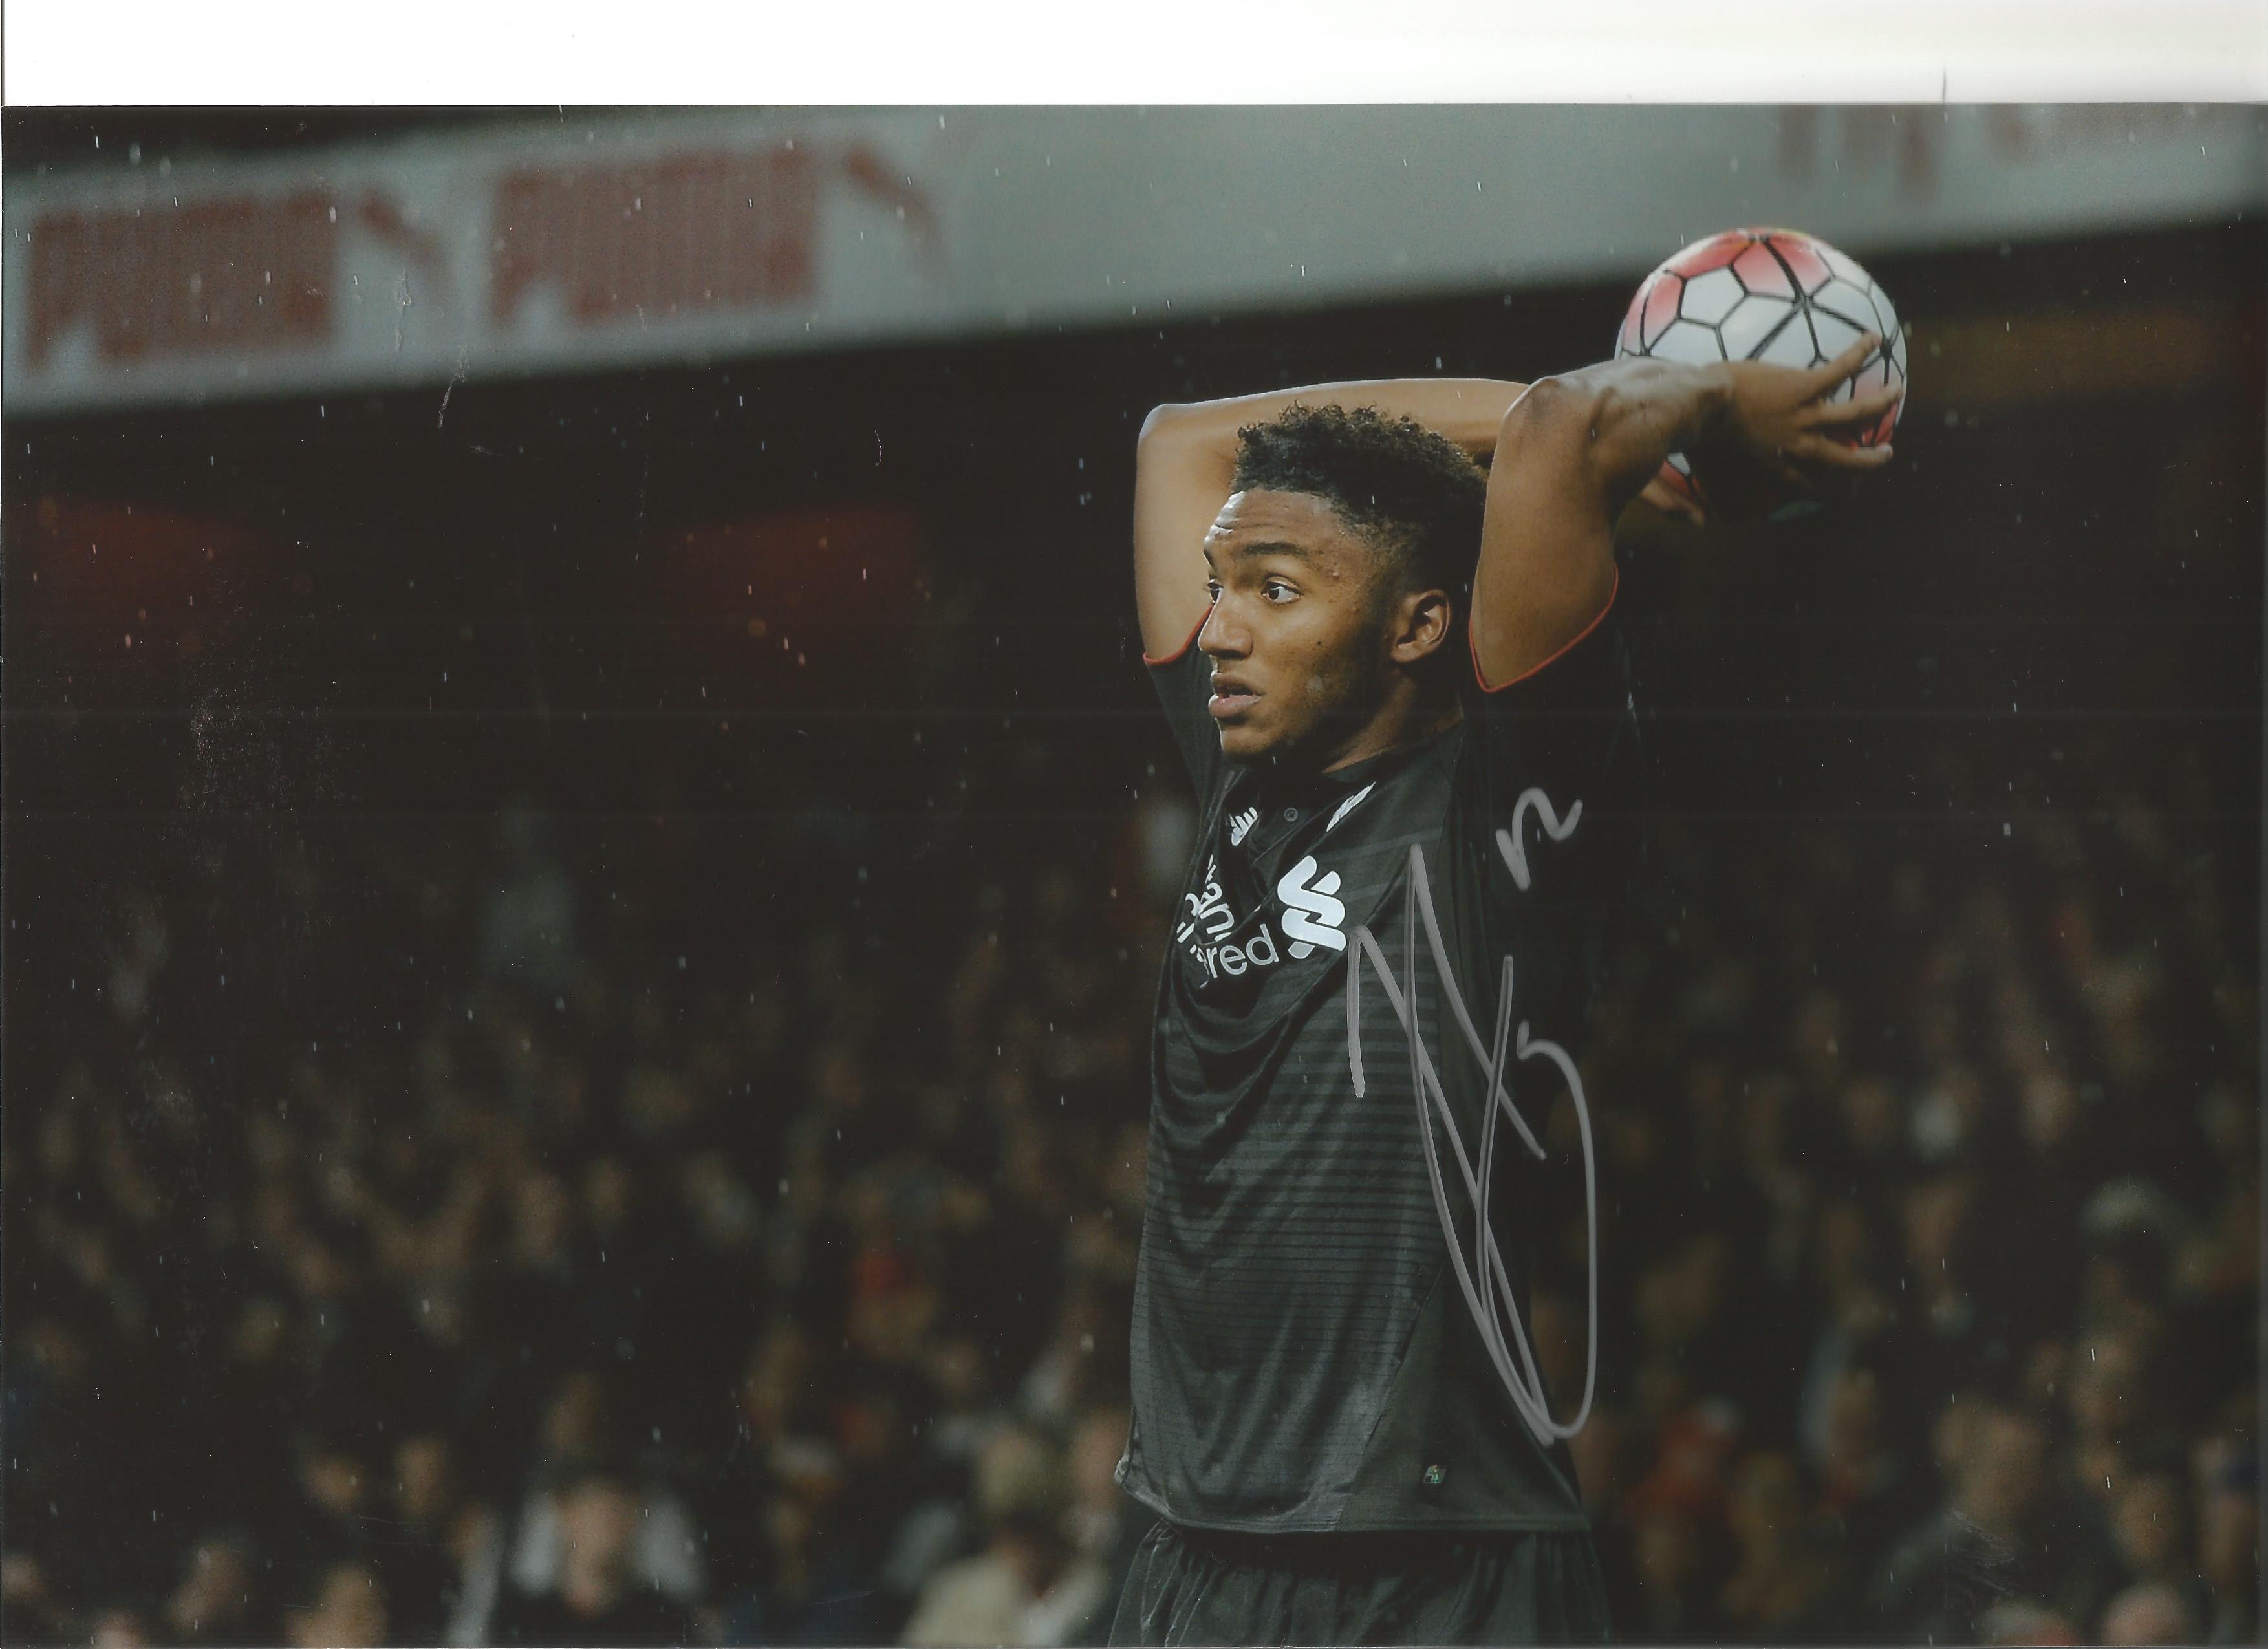 Joe Gomez Liverpool Signed 12 x 8 inch football photo. Good Condition. All autographs are genuine